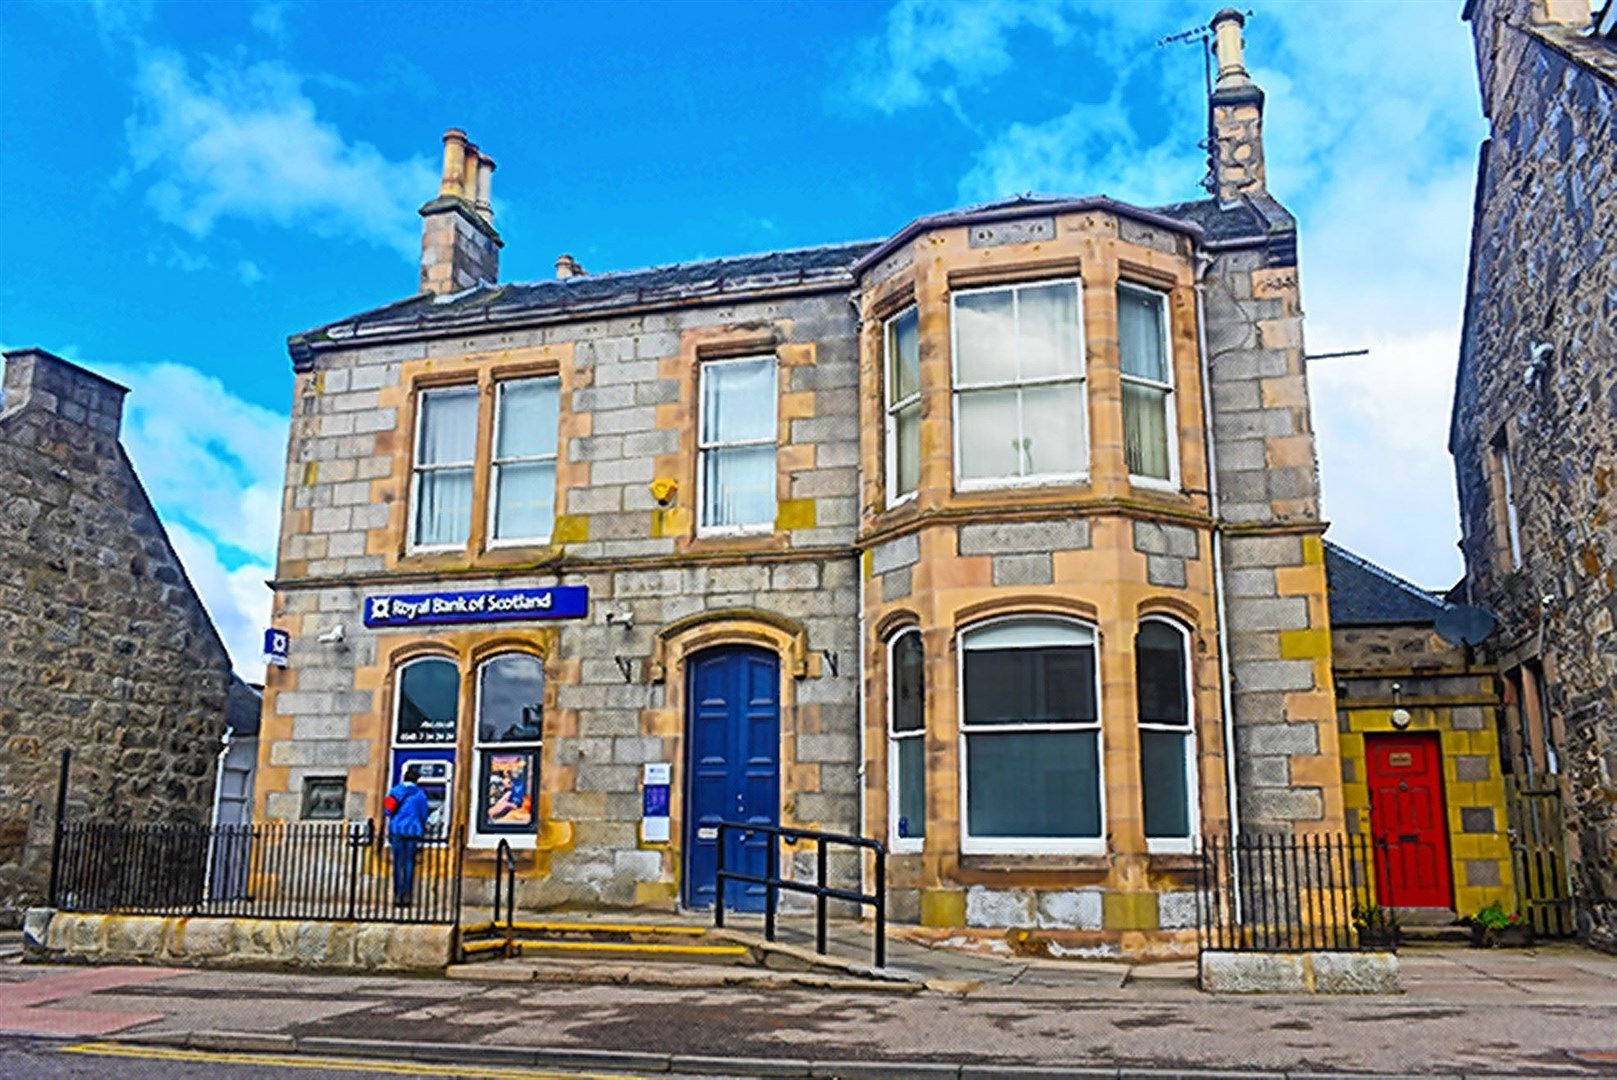 RBS' Grantown branch was axed in 2018 much to the community's dismay and frustration.